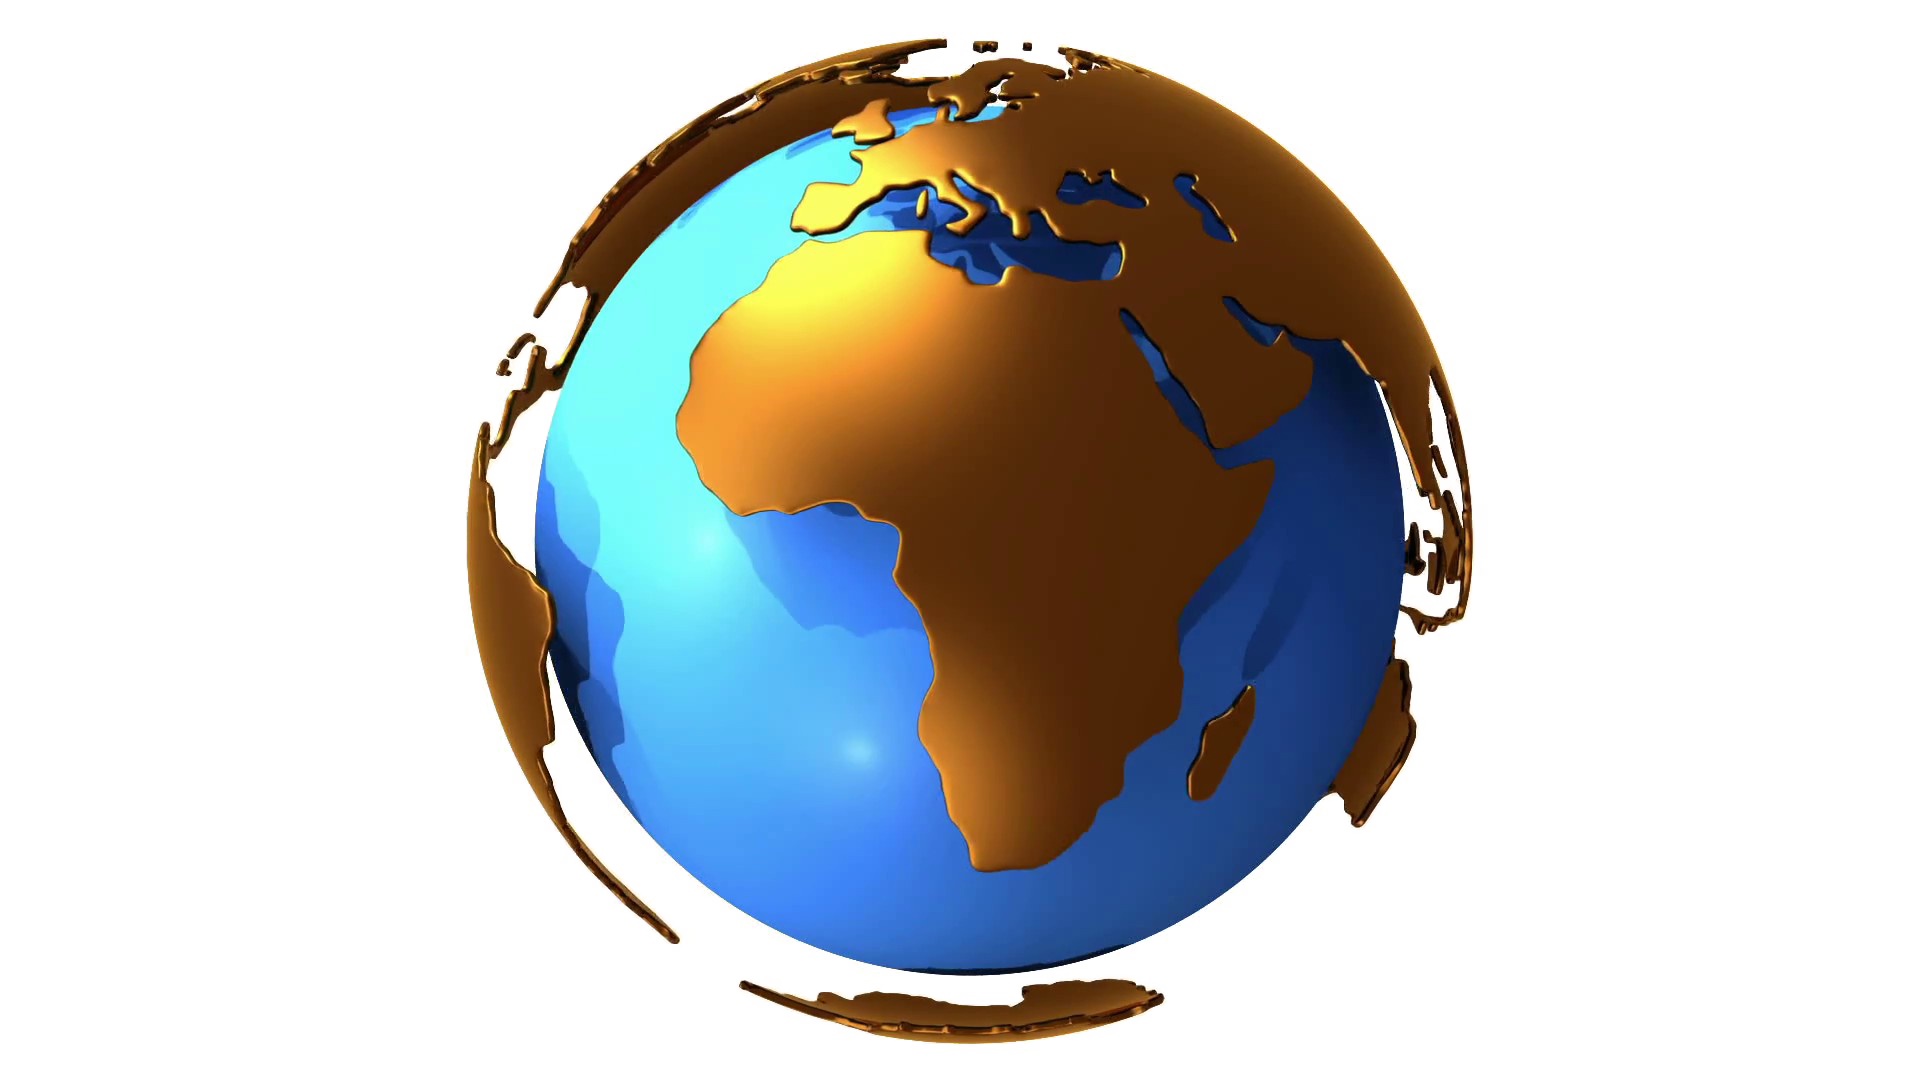 Download Earth Globe Image Free Transparent Image HQ HQ PNG Image